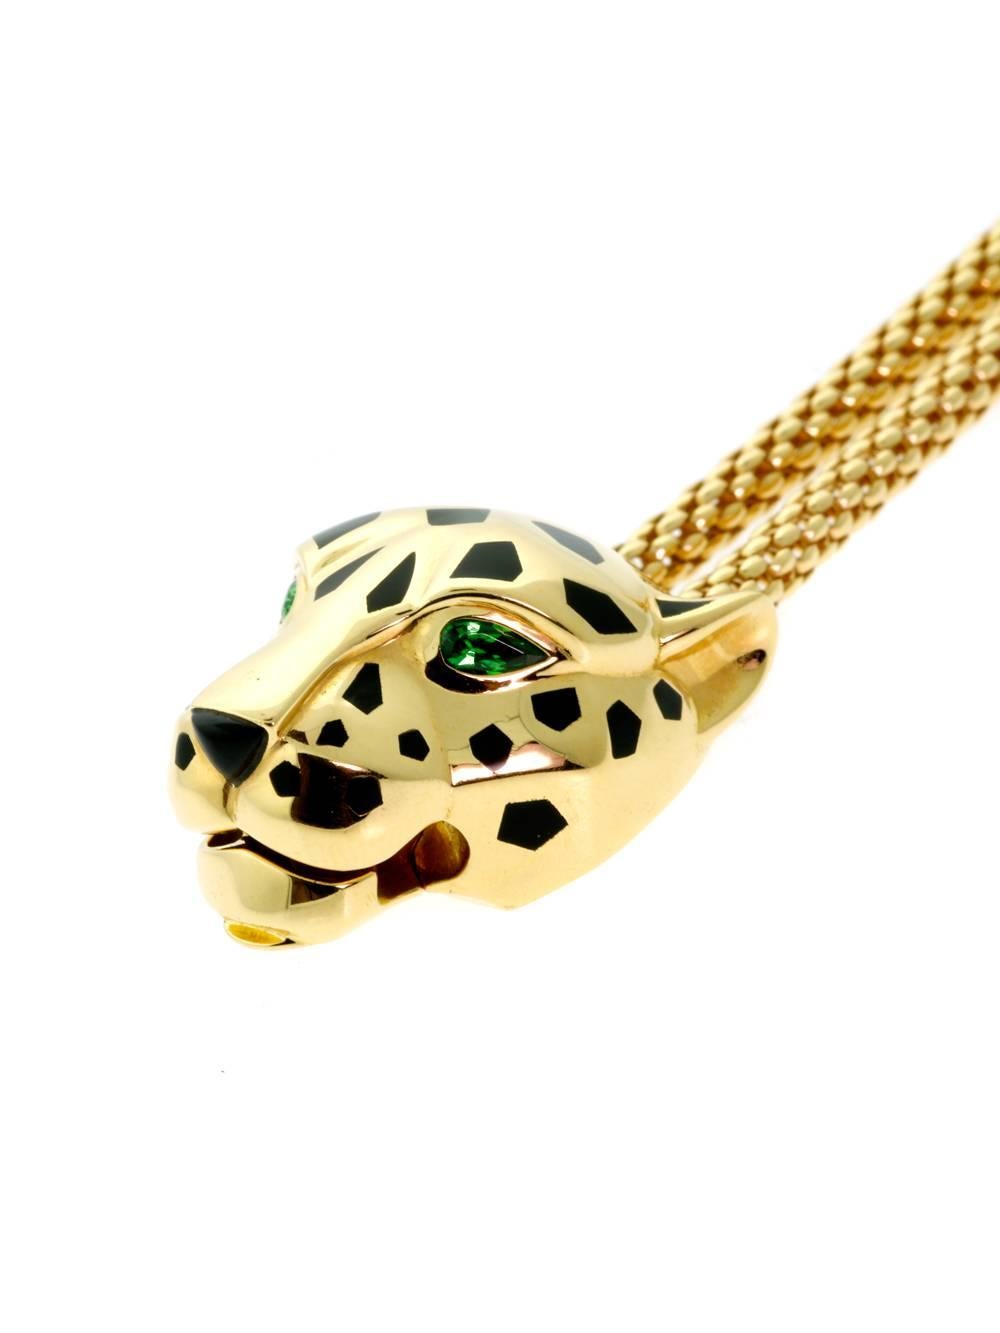 Detailing and one-of-a-kind design elements come together to form Cartier’s Panthere bracelet. Black spots adorn the animal’s head while Tsavorite eyes create a menacing glow. Made from 18-karat yellow gold and featuring Onyx, Tsavorite garnets and